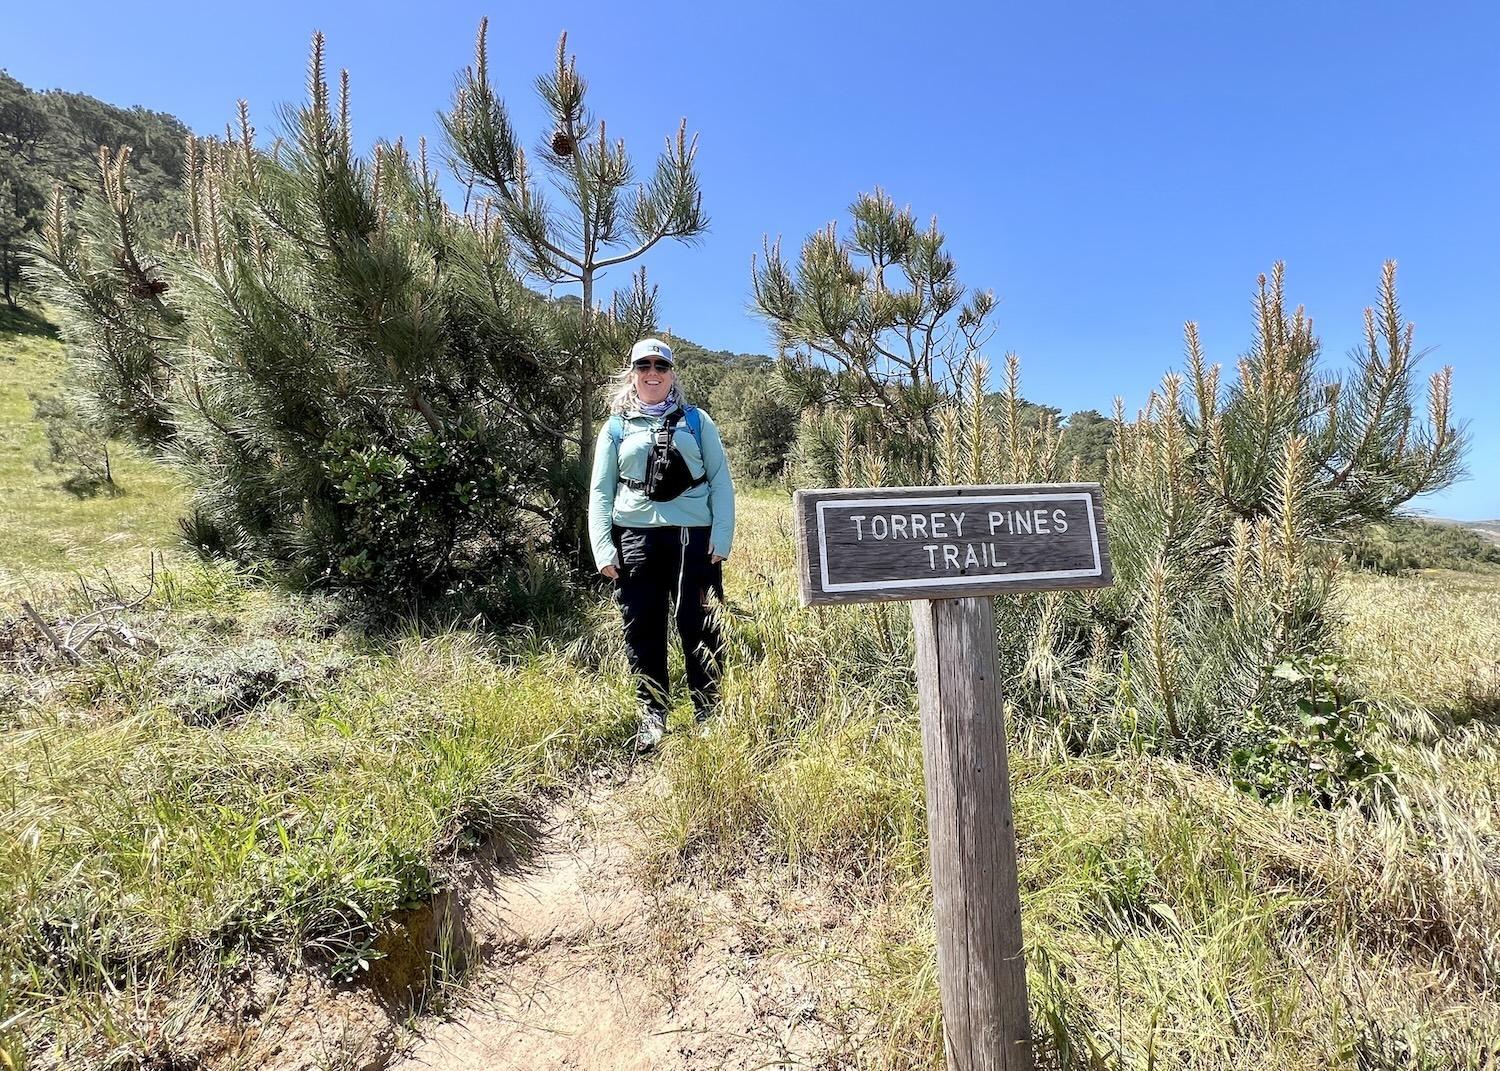 Leigh Baker Work, a naturalist with Lindblad Expeditions, hikes Torrey Pines Trail on Santa Rosa Island in Channel Islands National Park.